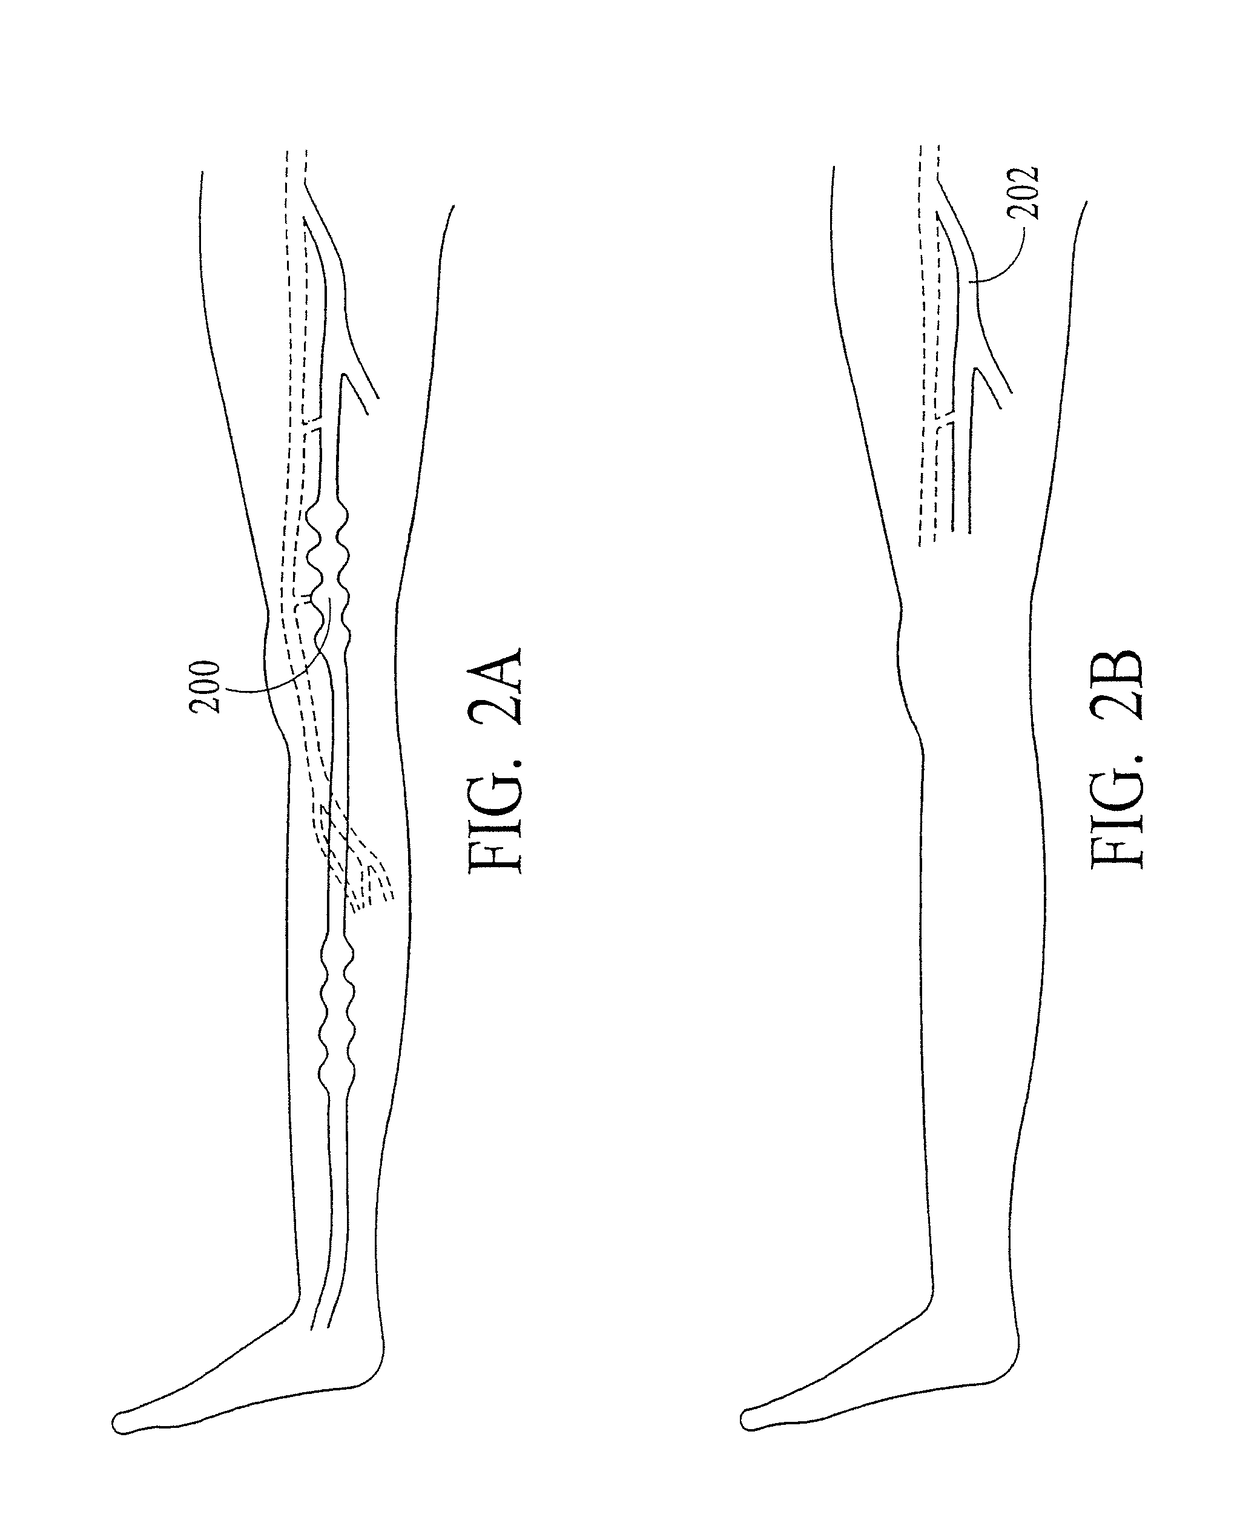 System and method for endovenous treatment of varicose veins with mid infrared laser